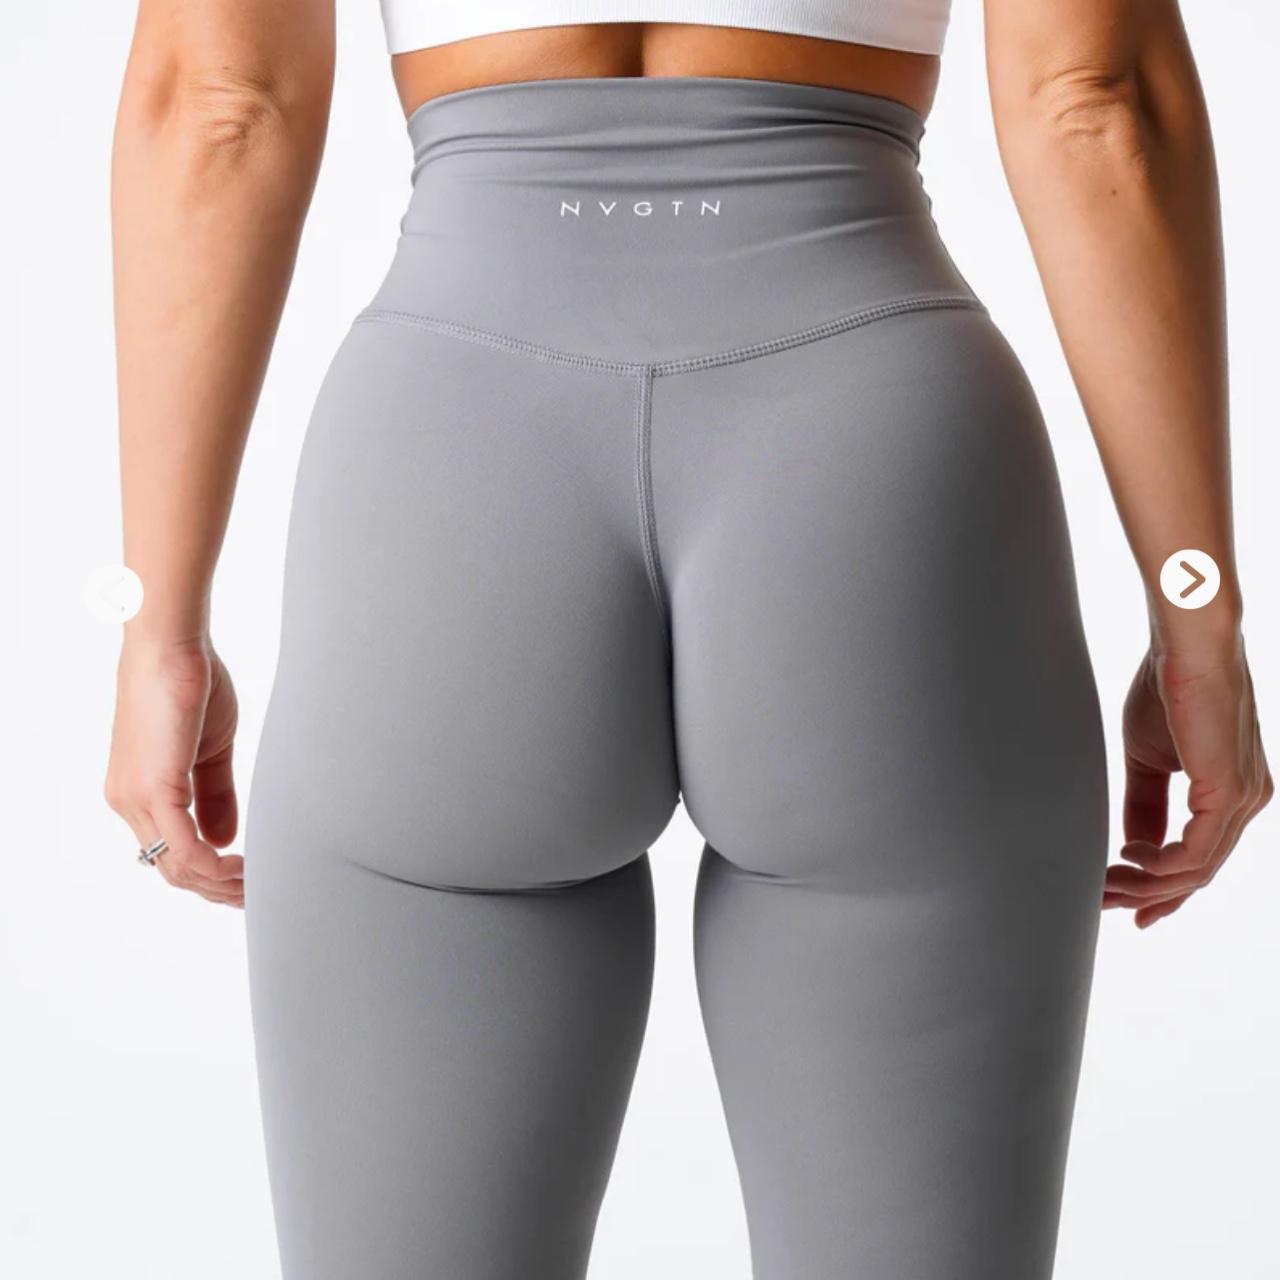 NVGTN Grey Signature 2.0 Leggings size small. Only